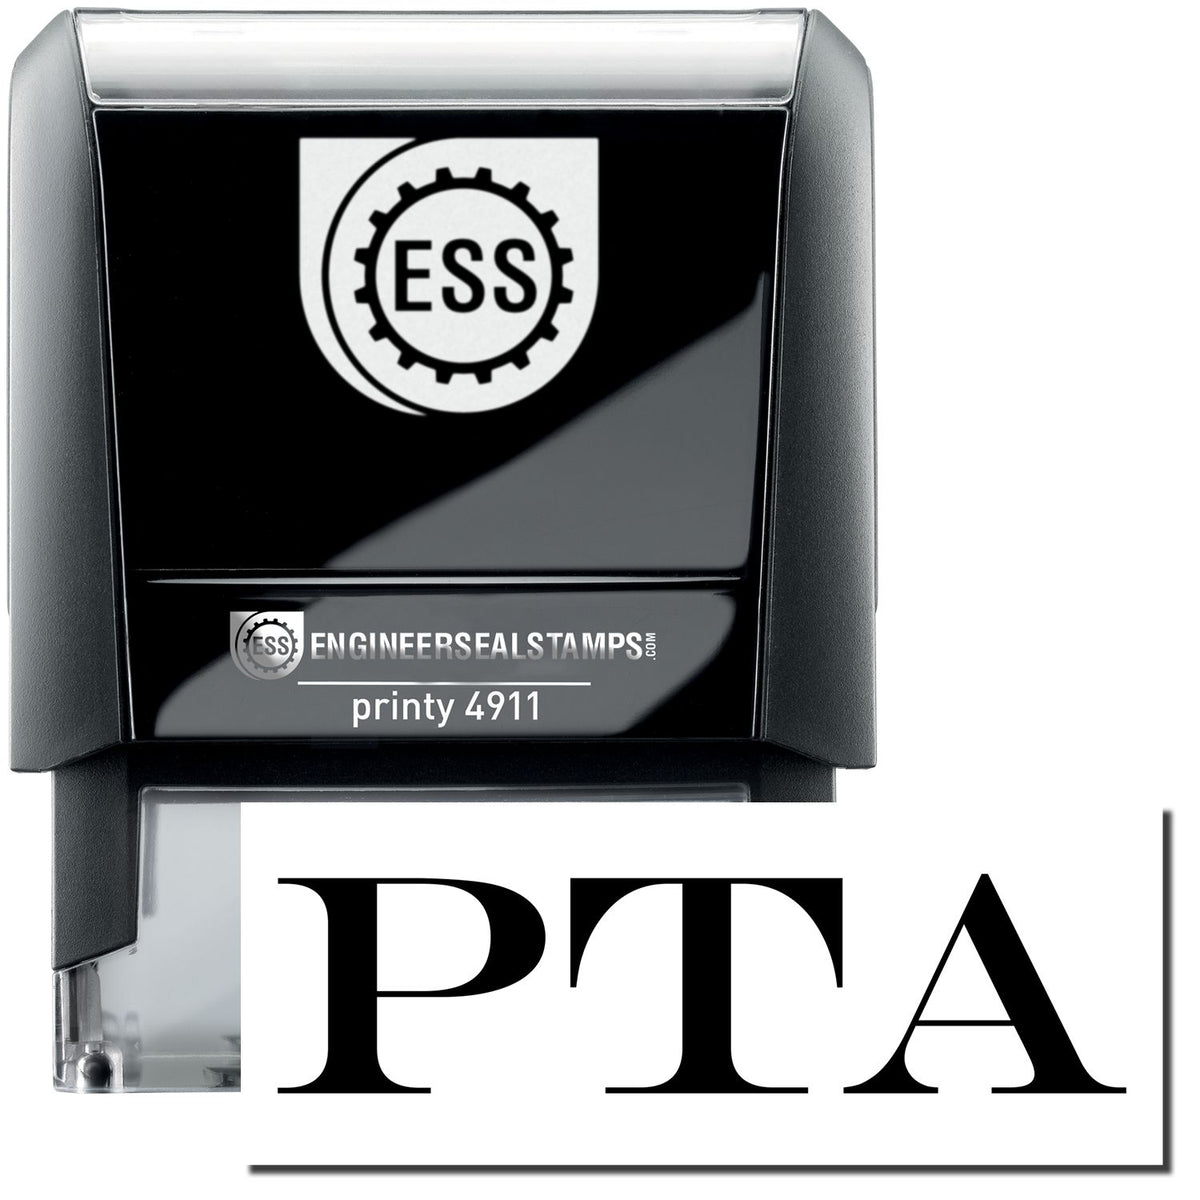 A self-inking stamp with a stamped image showing how the text &quot;PTA&quot; is displayed after stamping.